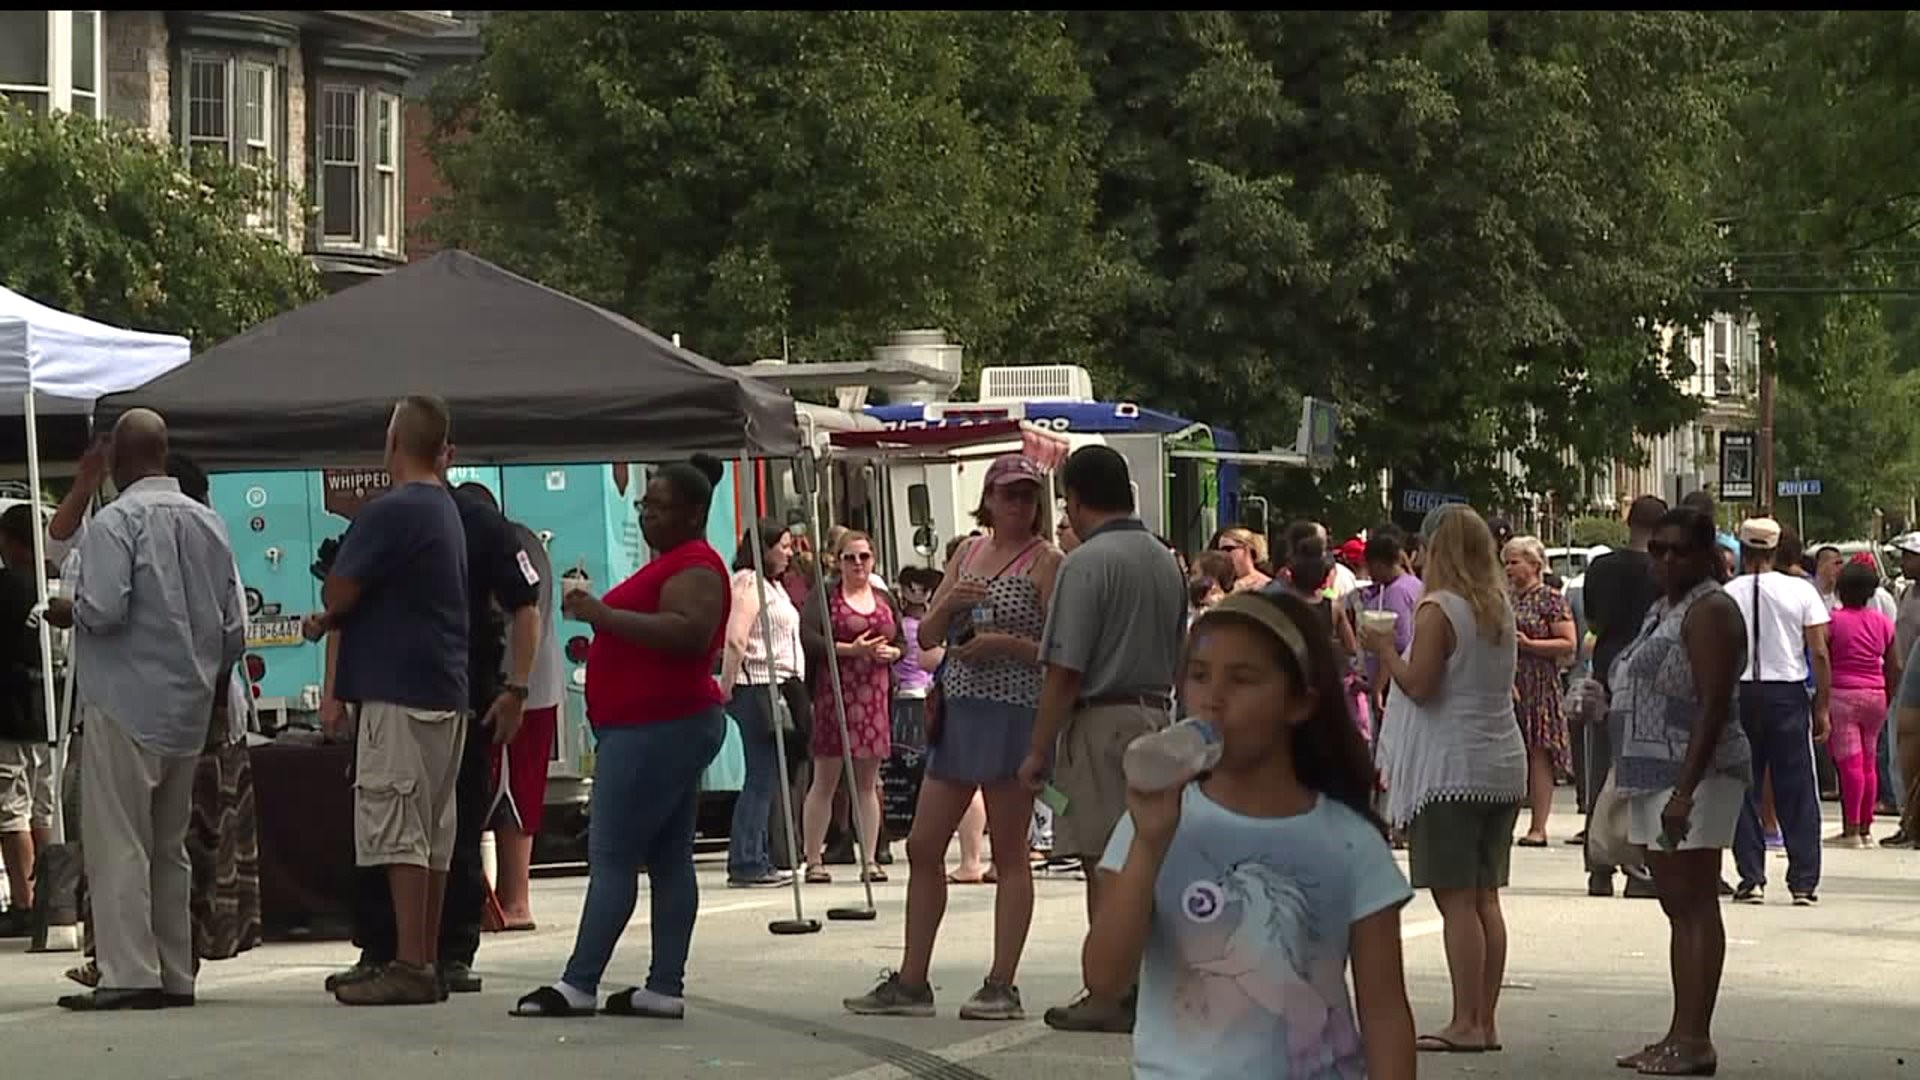 Governor Wolf hosts annual block party in Harrisburg